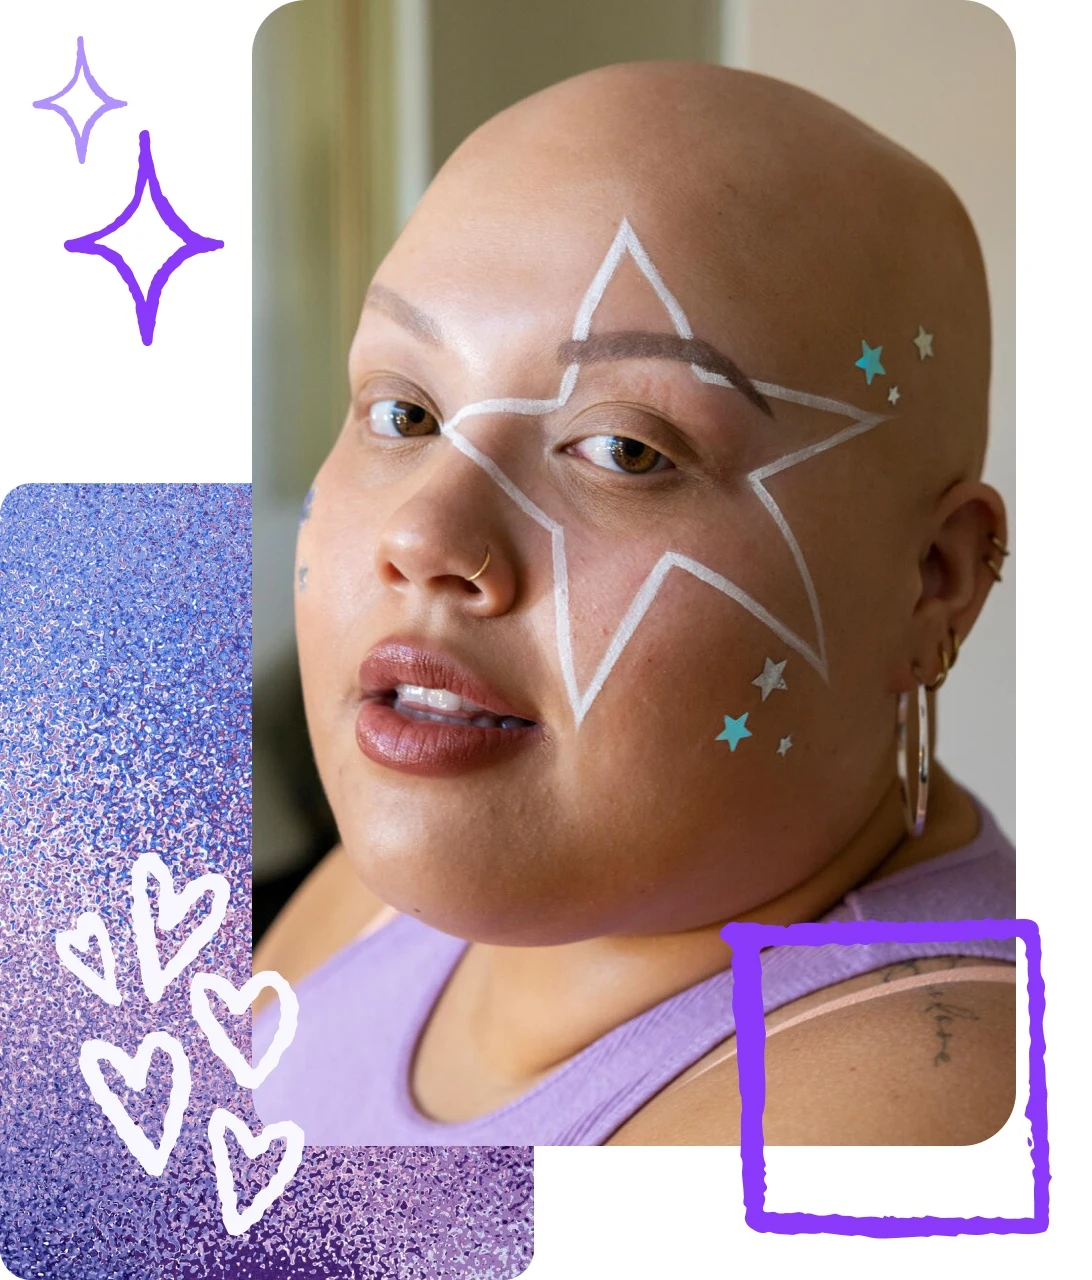 Pin collage of a woman with a bald head wearing star make-up with purple accents